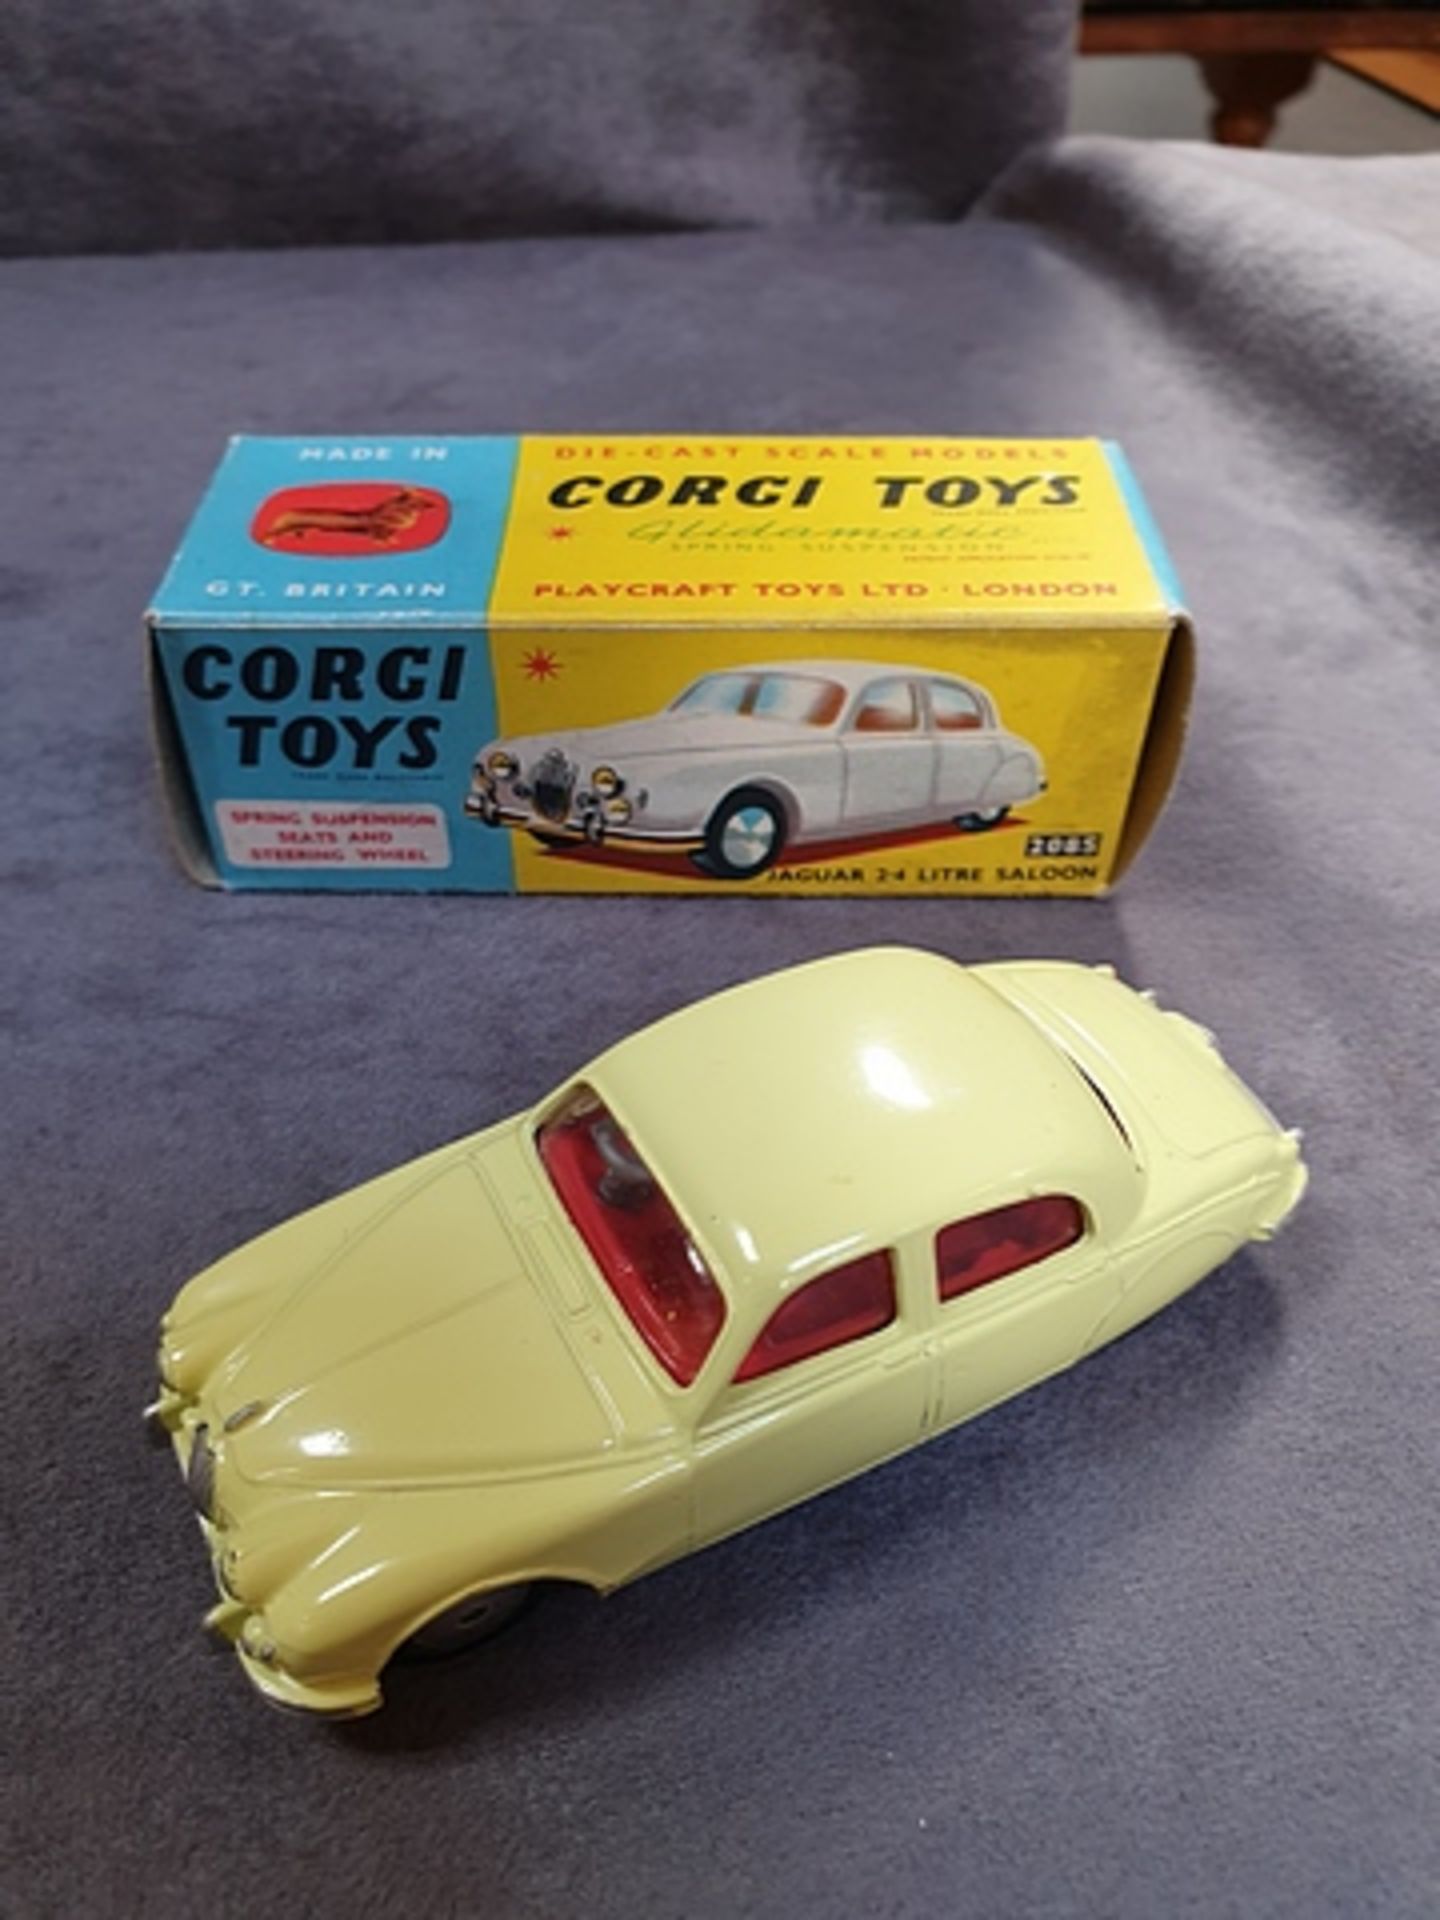 Corgi Toys diecast # 280S Jaguar 24 Litre Saloon in yellow with red interior complete in box